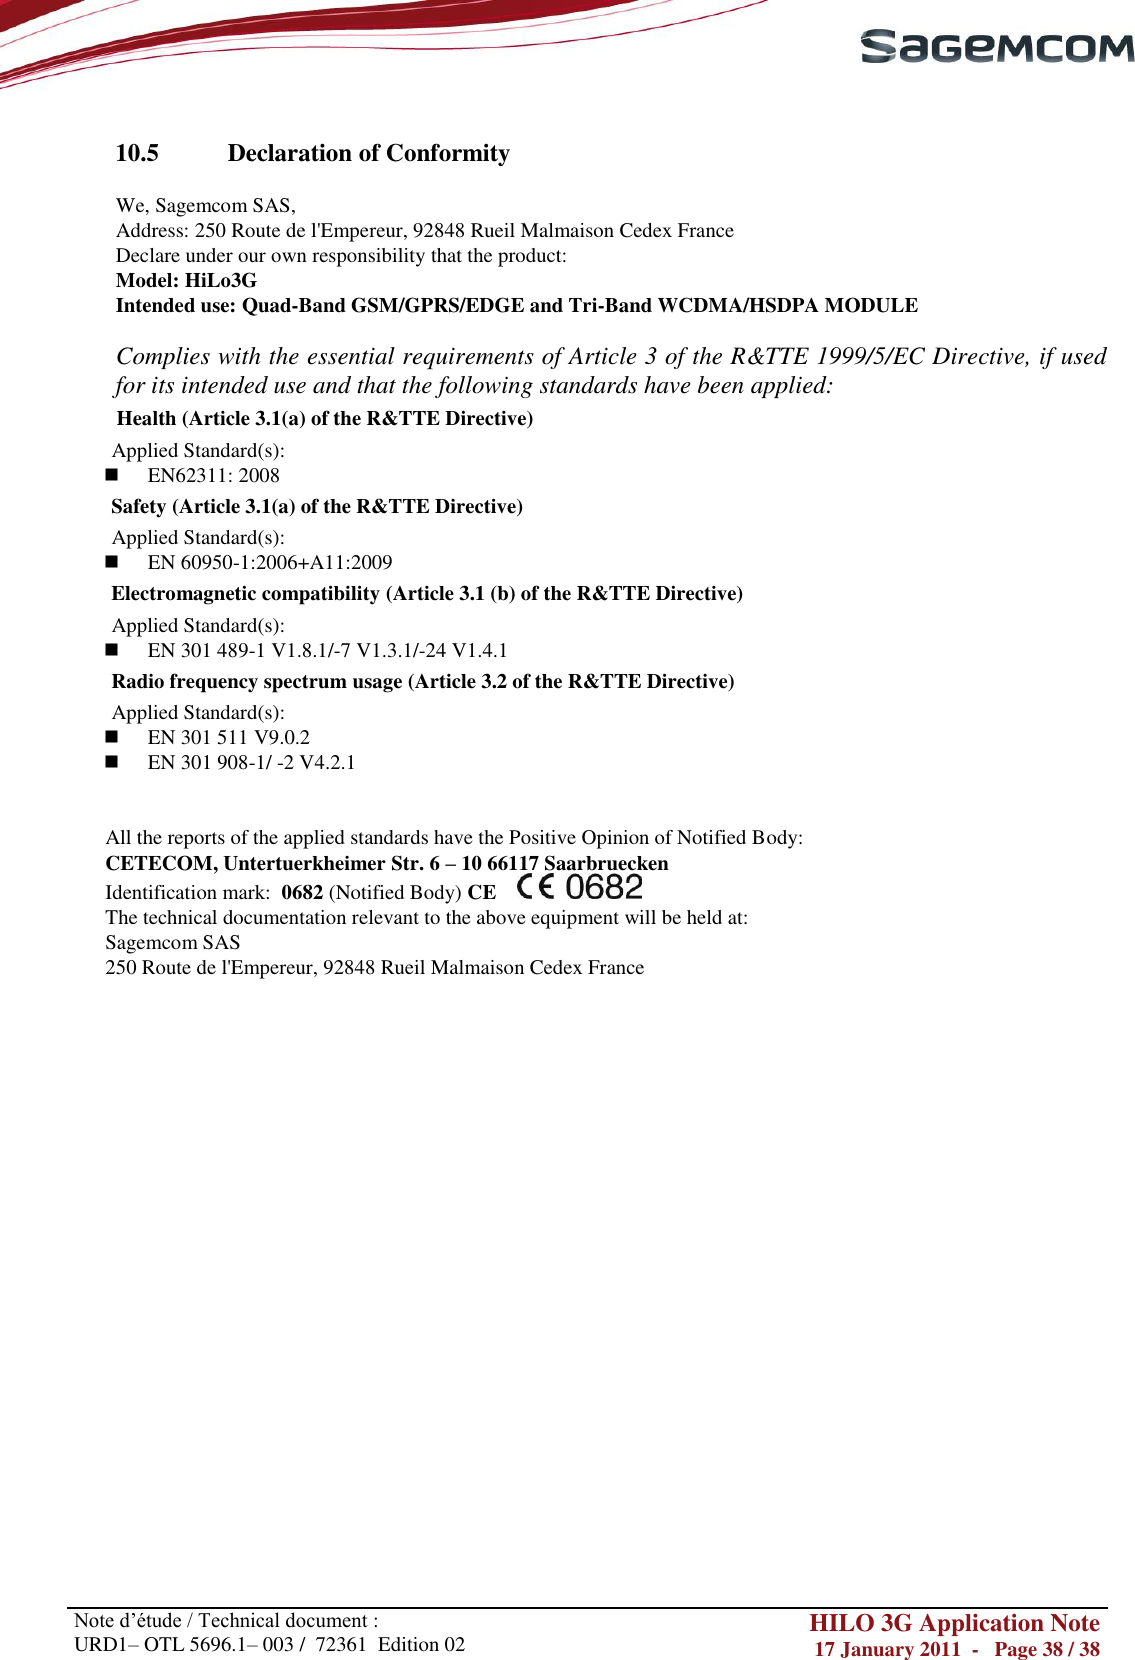       Note d‘étude / Technical document : URD1– OTL 5696.1– 003 /  72361  Edition 02 HILO 3G Application Note 17 January 2011  -   Page 38 / 38     10.5  Declaration of Conformity  We, Sagemcom SAS, Address: 250 Route de l&apos;Empereur, 92848 Rueil Malmaison Cedex France Declare under our own responsibility that the product: Model: HiLo3G Intended use: Quad-Band GSM/GPRS/EDGE and Tri-Band WCDMA/HSDPA MODULE  Complies with the essential requirements of Article 3 of the R&amp;TTE 1999/5/EC Directive, if used for its intended use and that the following standards have been applied:  Health (Article 3.1(a) of the R&amp;TTE Directive) Applied Standard(s):      EN62311: 2008  Safety (Article 3.1(a) of the R&amp;TTE Directive) Applied Standard(s):    EN 60950-1:2006+A11:2009 Electromagnetic compatibility (Article 3.1 (b) of the R&amp;TTE Directive) Applied Standard(s):    EN 301 489-1 V1.8.1/-7 V1.3.1/-24 V1.4.1 Radio frequency spectrum usage (Article 3.2 of the R&amp;TTE Directive) Applied Standard(s):   EN 301 511 V9.0.2    EN 301 908-1/ -2 V4.2.1   All the reports of the applied standards have the Positive Opinion of Notified Body: CETECOM, Untertuerkheimer Str. 6 – 10 66117 Saarbruecken Identification mark:  0682 (Notified Body) CE      The technical documentation relevant to the above equipment will be held at: Sagemcom SAS 250 Route de l&apos;Empereur, 92848 Rueil Malmaison Cedex France   